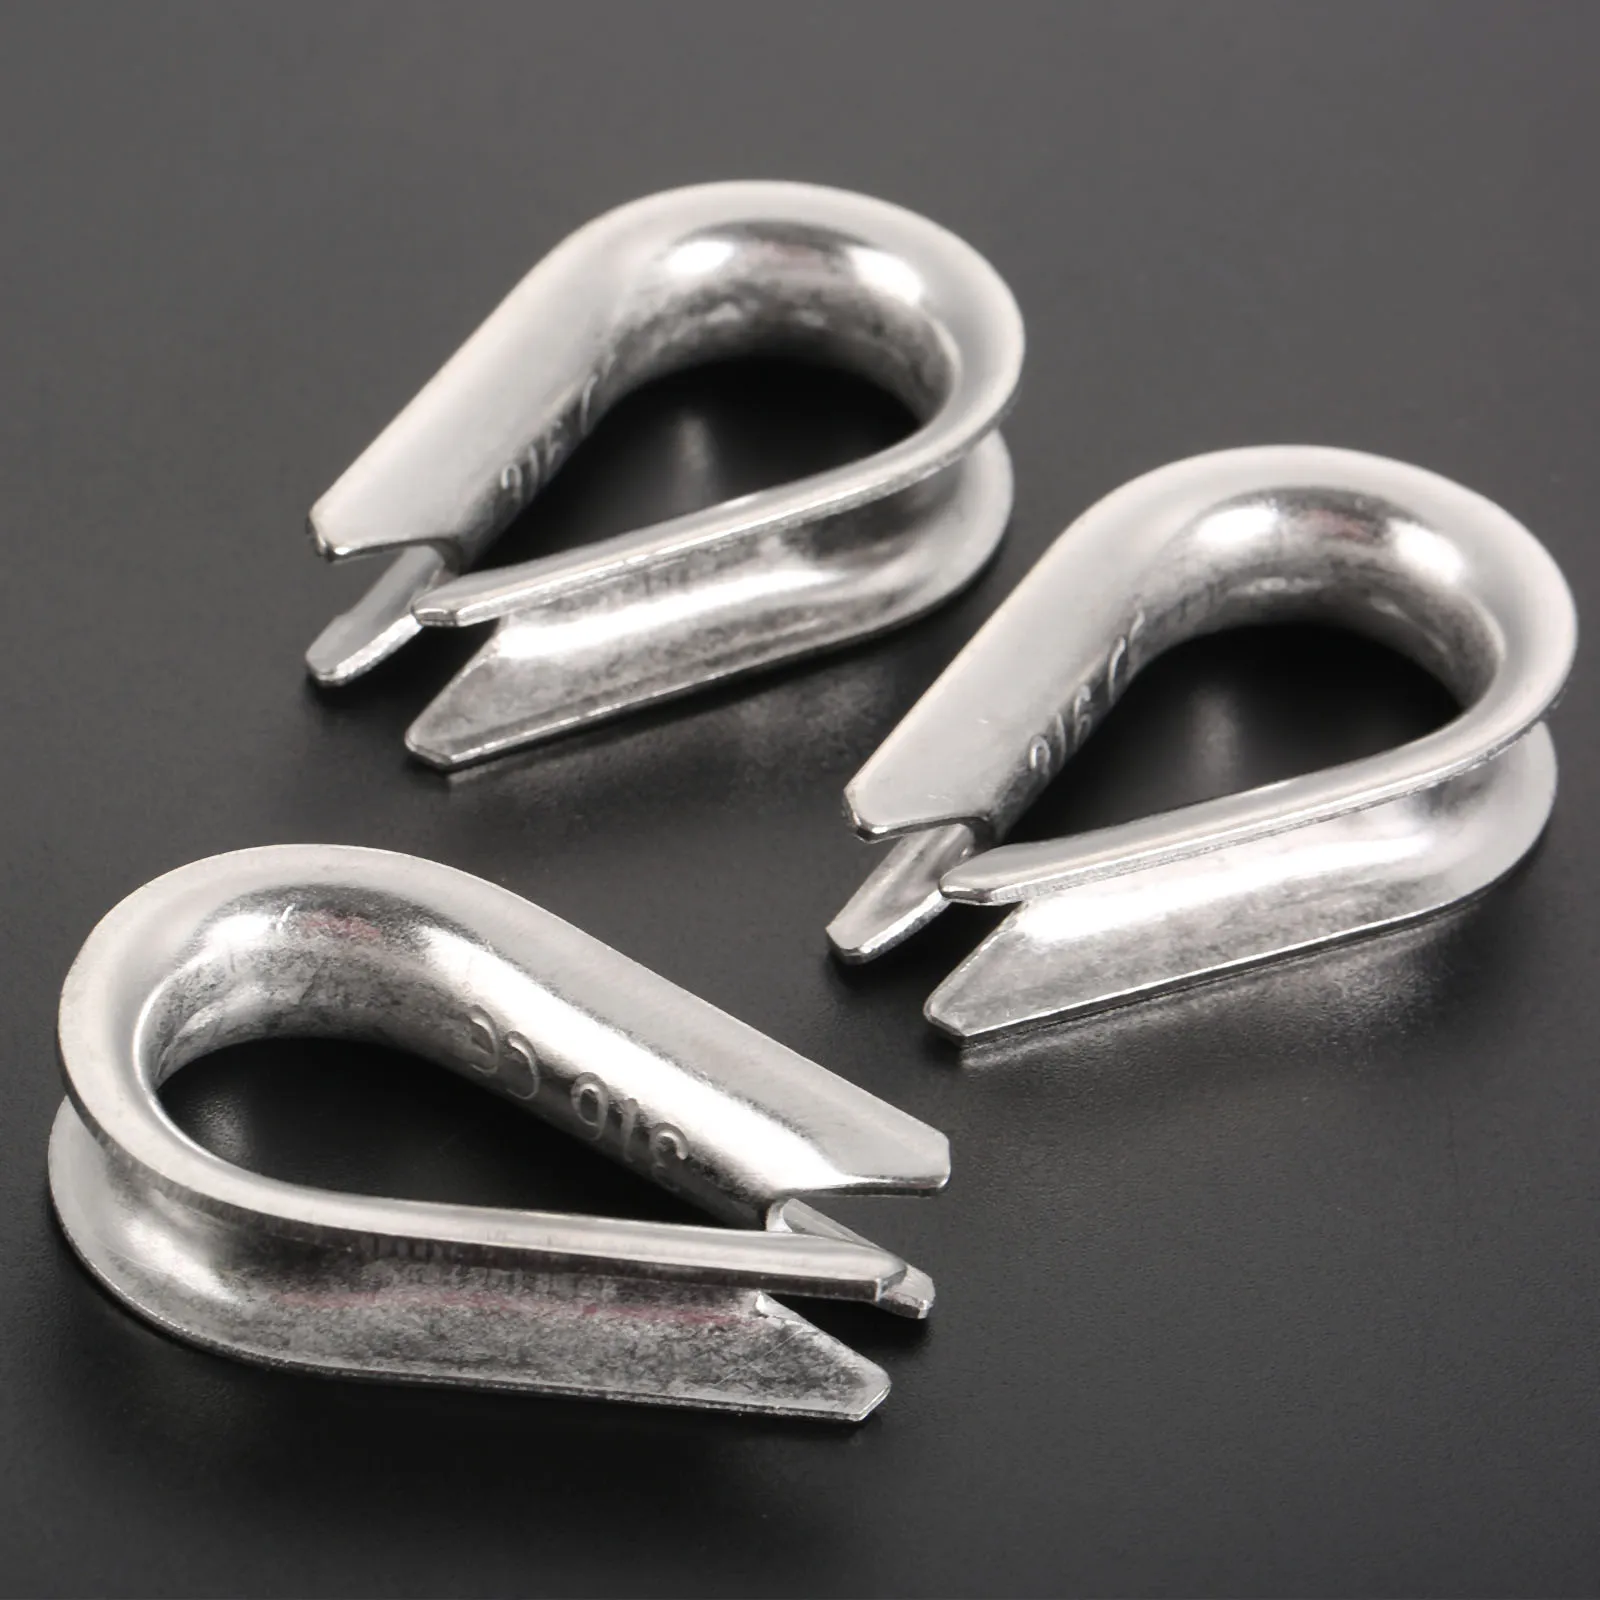 10Pcs Wire Rope Thimbles Marine Grade 316 Stainless Steel for 8mm / 5/16 Inch Diameter Wire Rope/Cable Boats Accessories 100 meter steel pvc coated flexible wire rope soft cable transparent stainless steel clothesline diameter 0 8 1 1 5 2 2 5 3 4mm